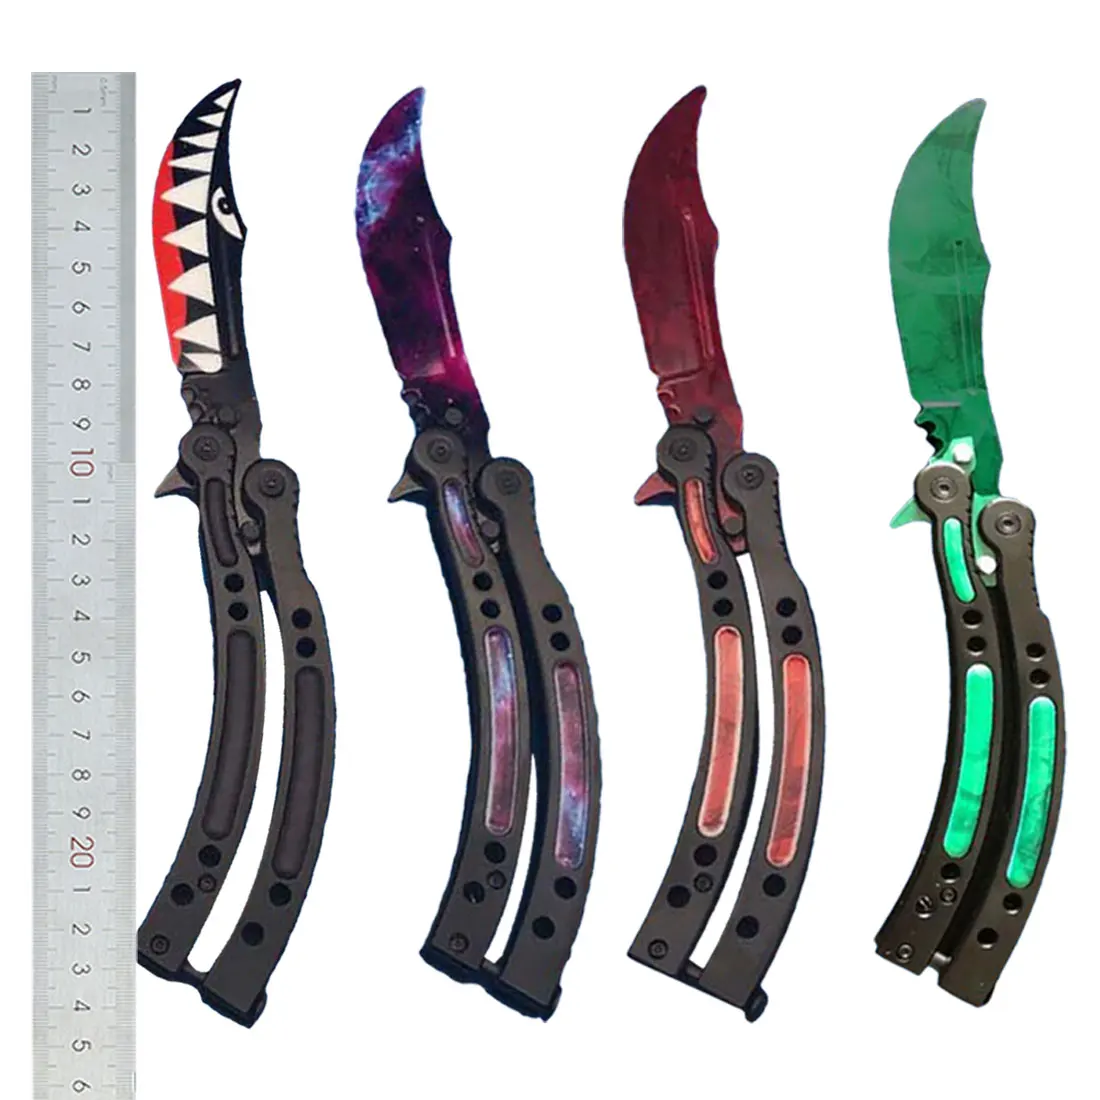 

Butterfly in Knife Training Stainless Steel Knife Butterfly CS GO Knife Counter Strike Game Folding Knife no Edge Dull Tool